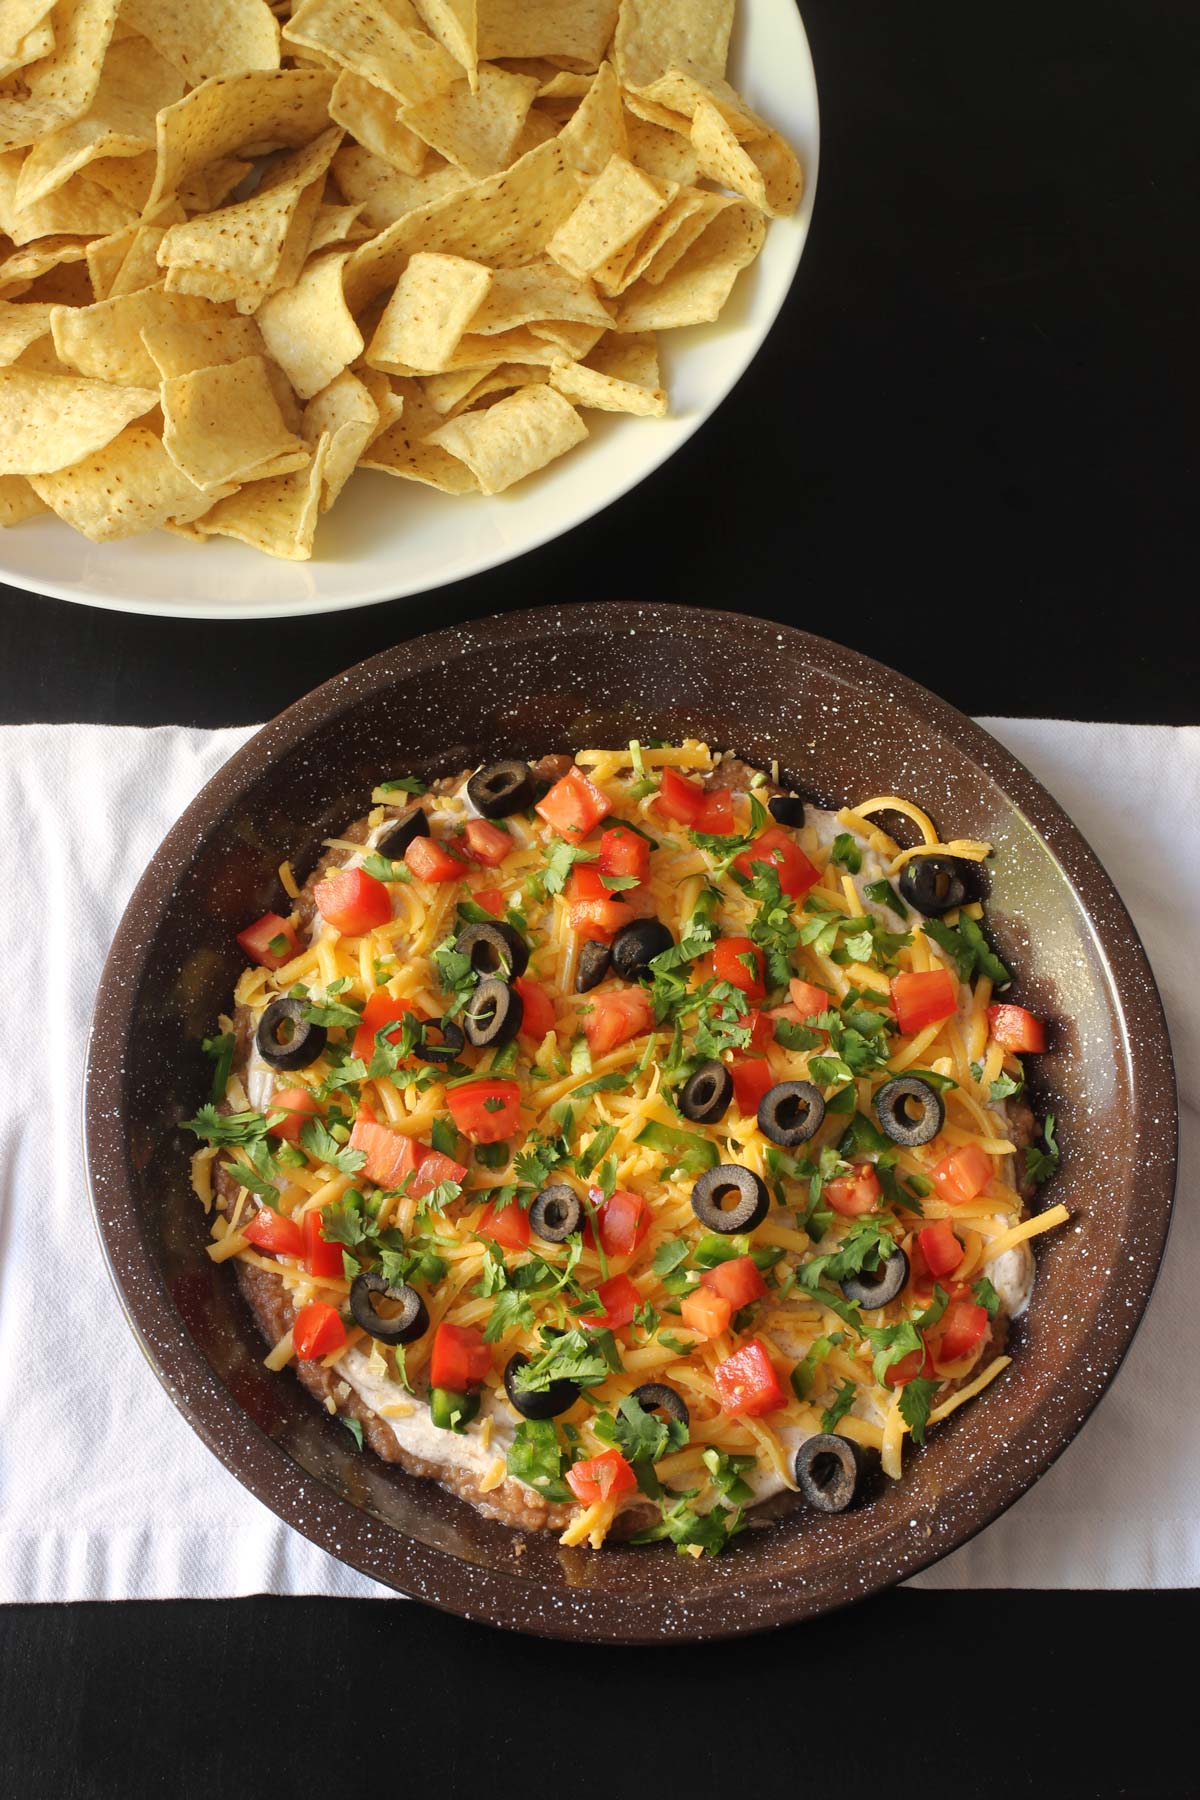 seven layer dip on white cloth next to bowl of chips.